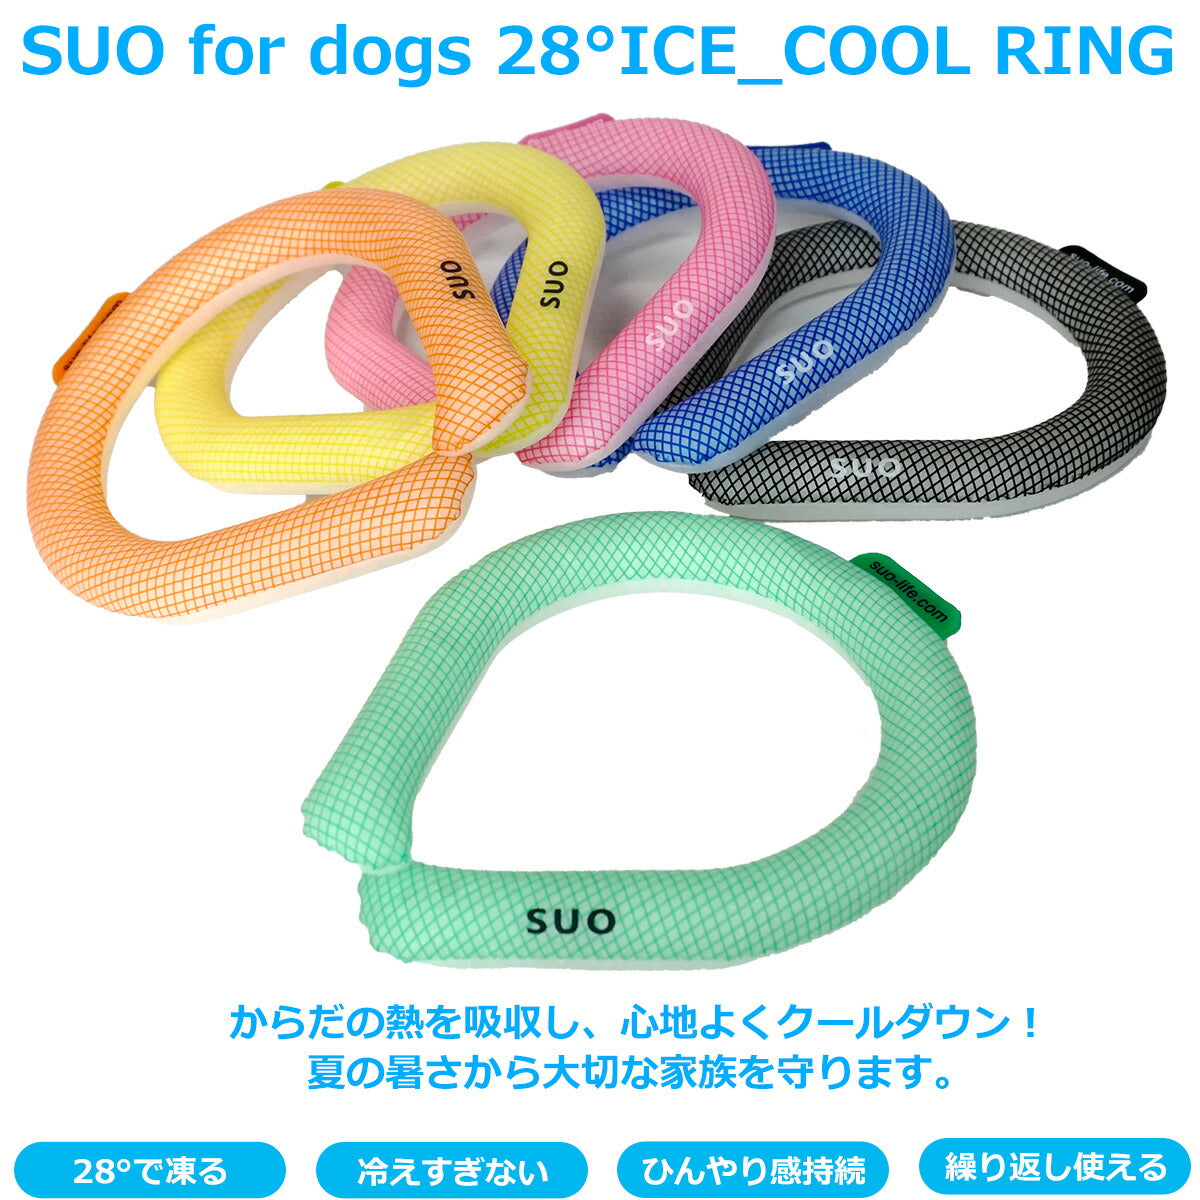 SUO for dogs 28°ICE SUOリング ボタンなし XS ブラック 熱中症対策グッズ 暑さ対策 ひんやり 首 冷感 犬 大人 子供